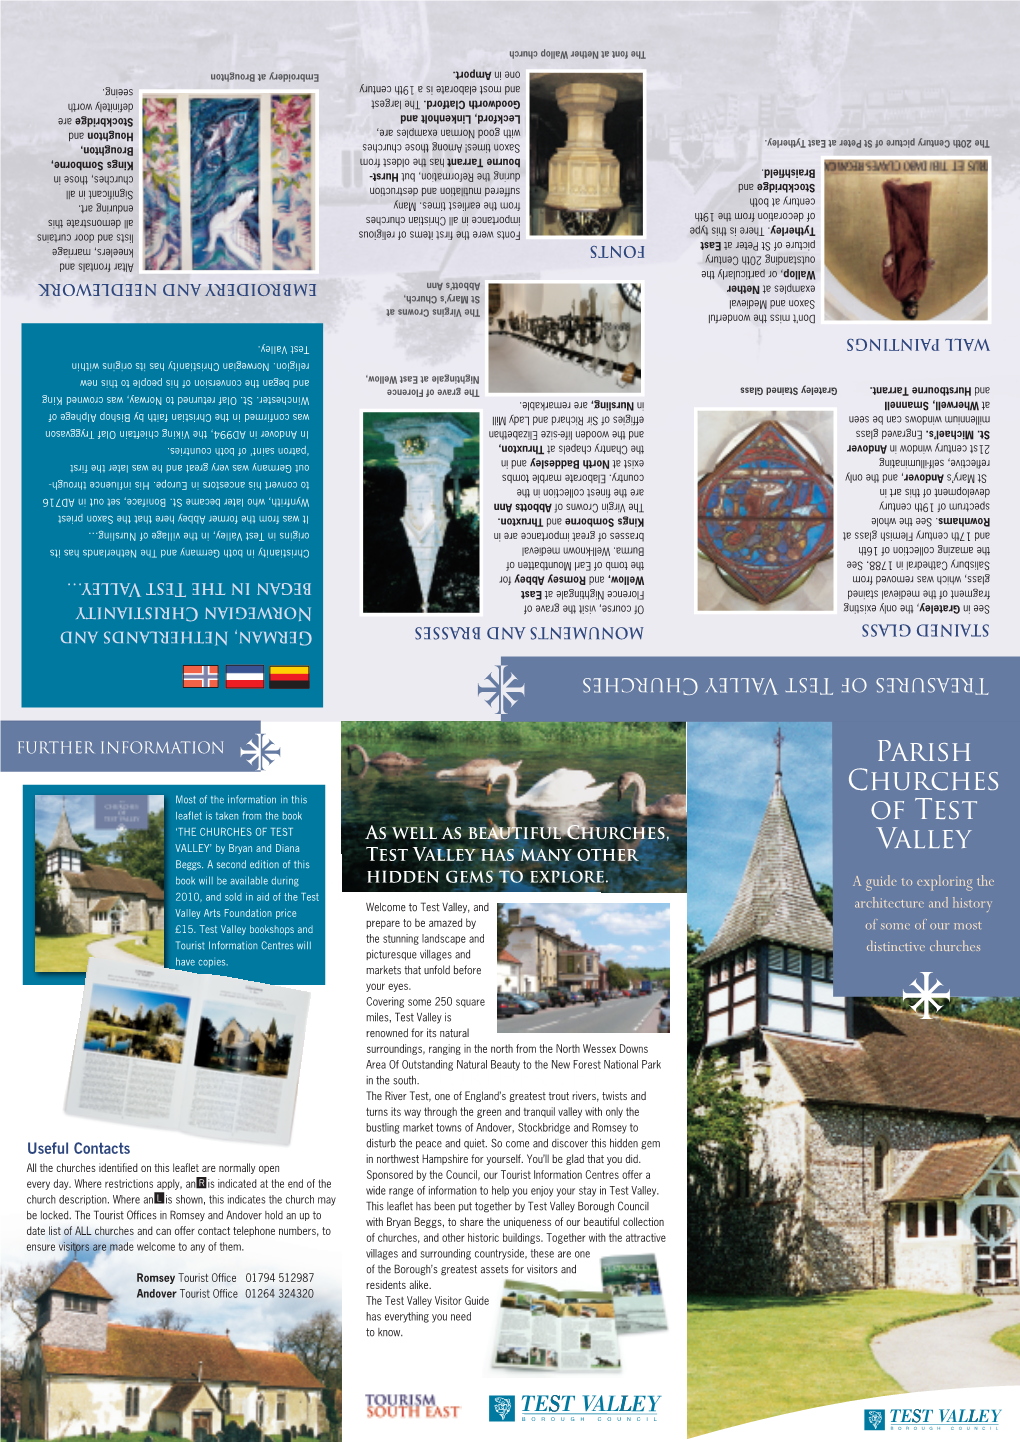 Parish Churches of the Test Valley